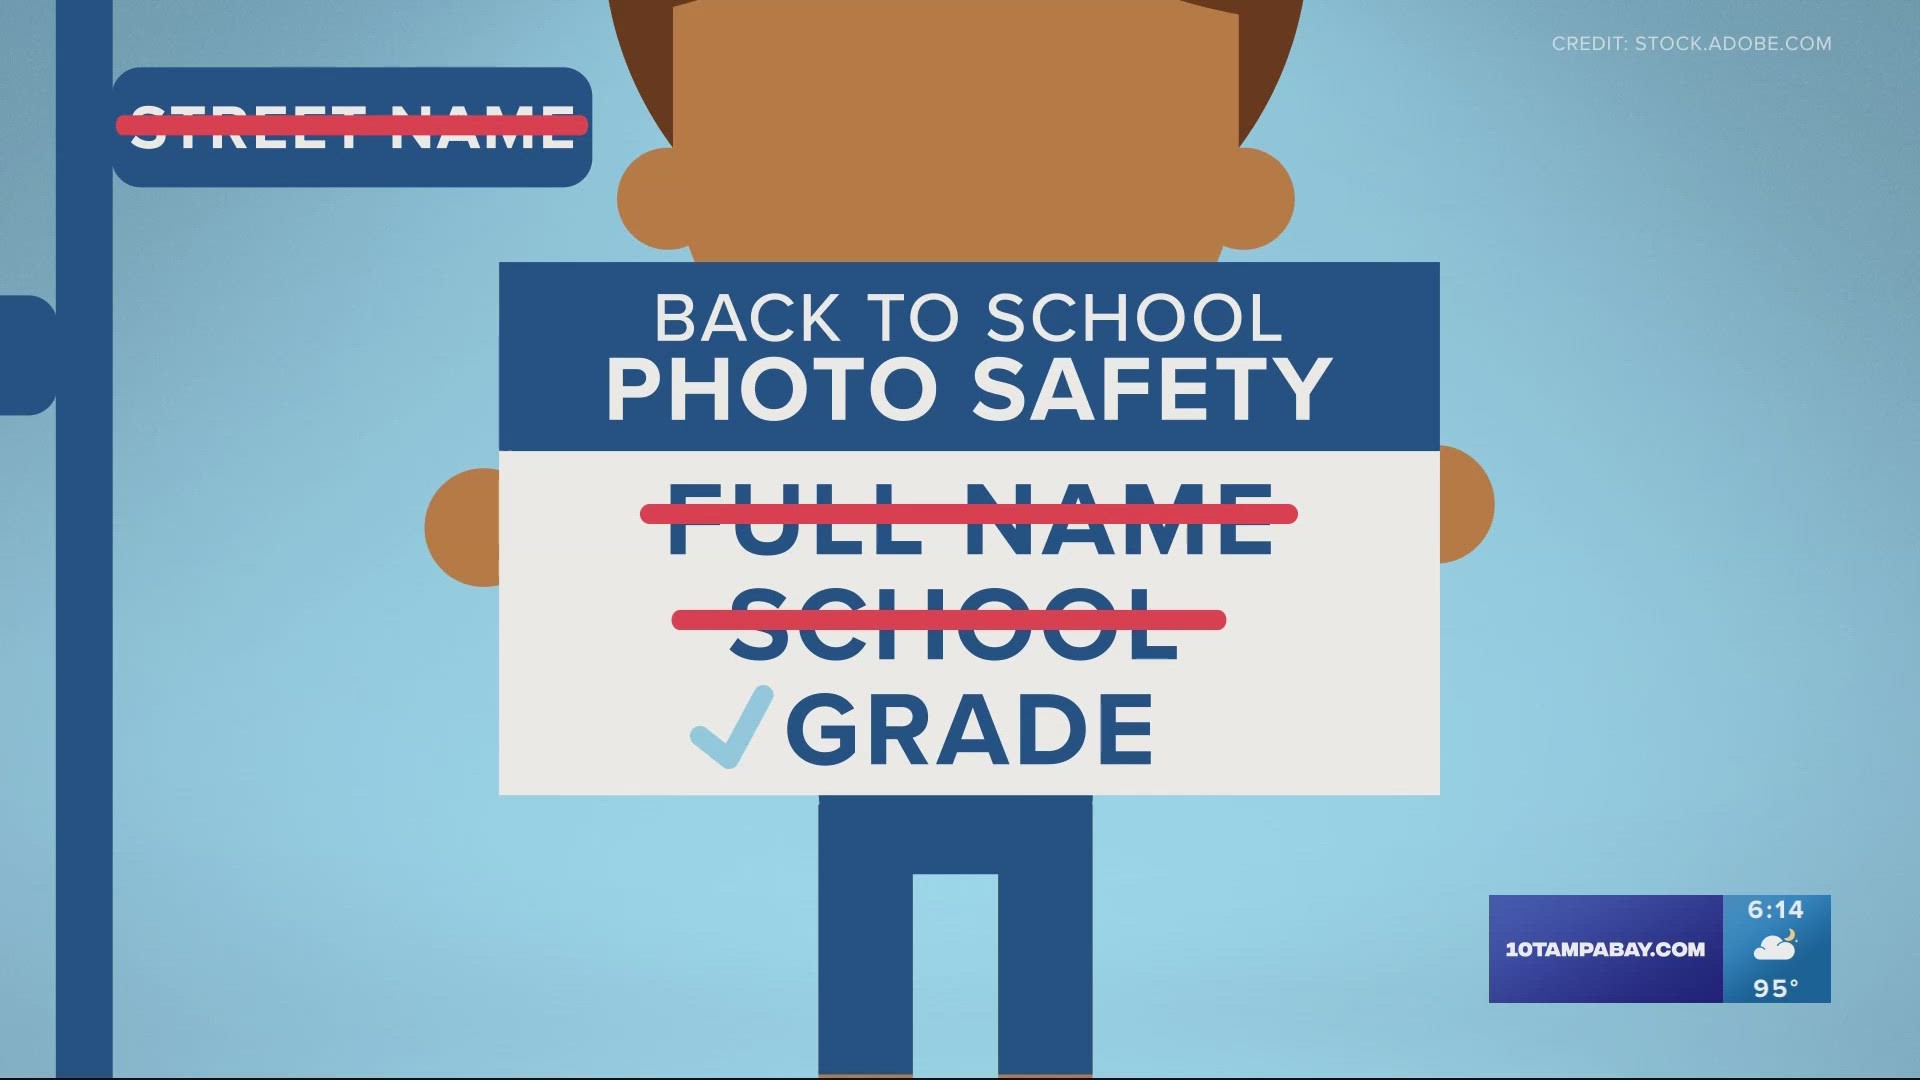 The sheriff's office provided tips on how to post photos of your child safely on social media.